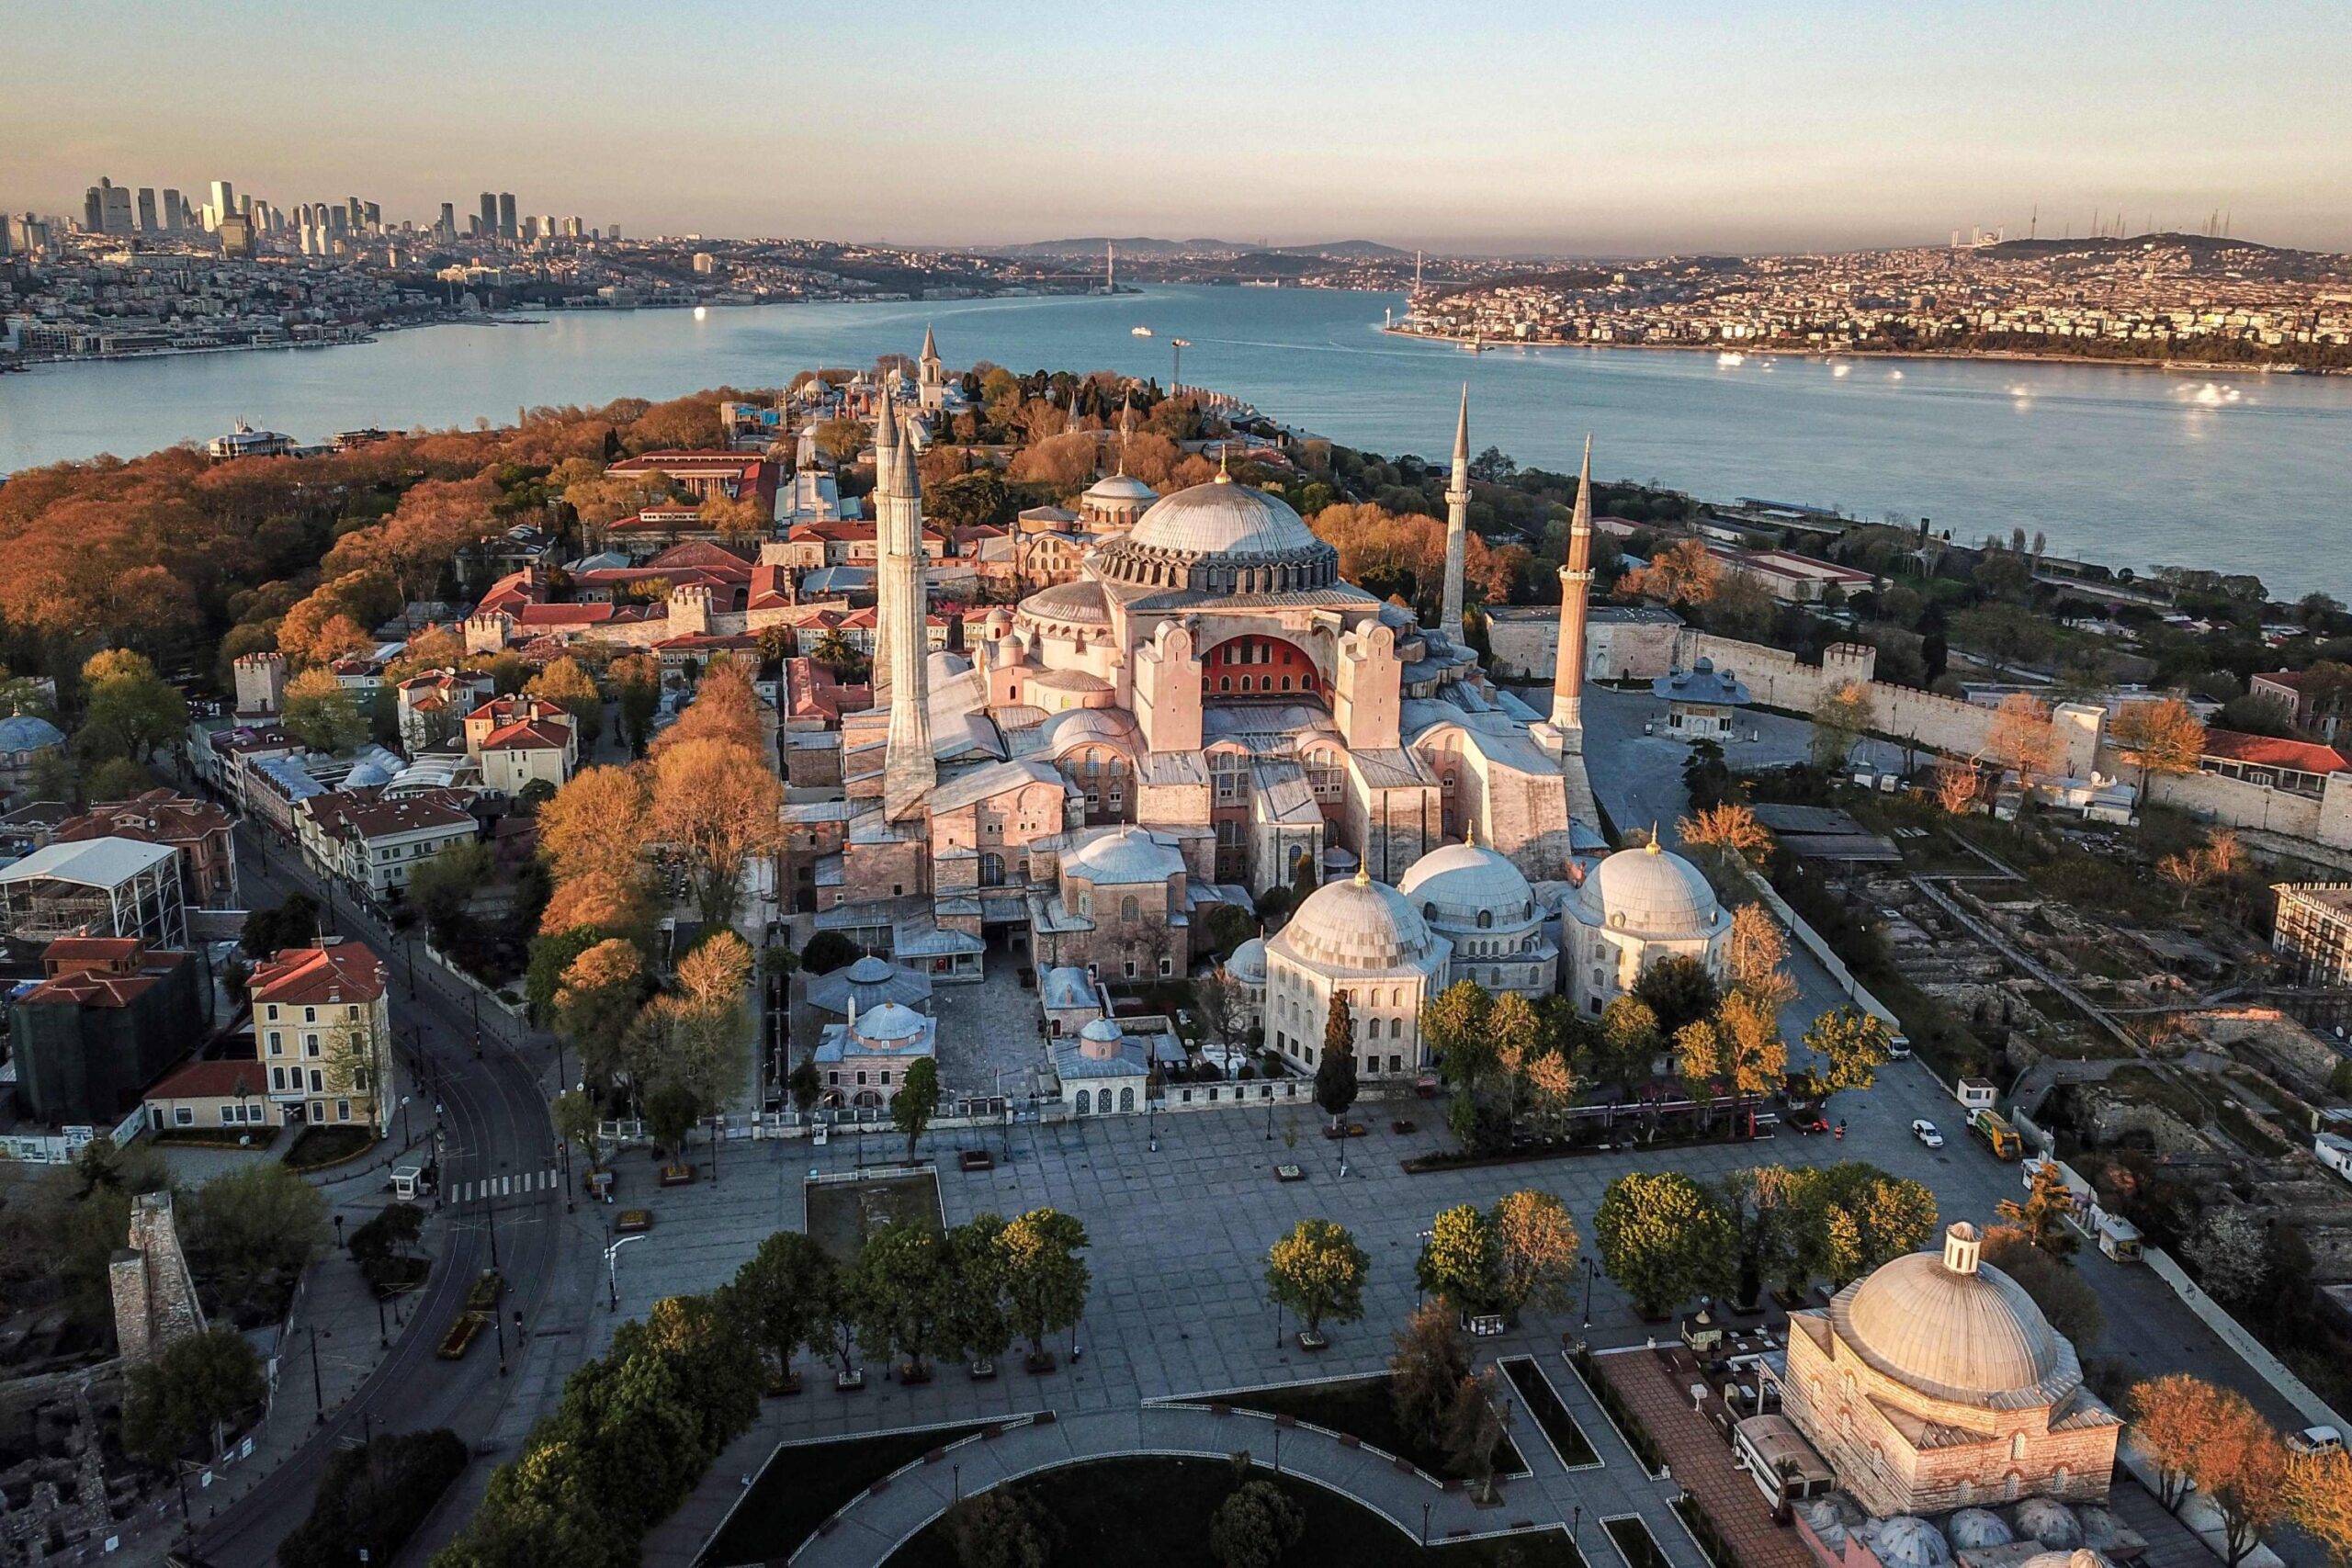 Old Istanbul (Sultanahmet) with the Bosphorus Strait dividing Asia and Europe